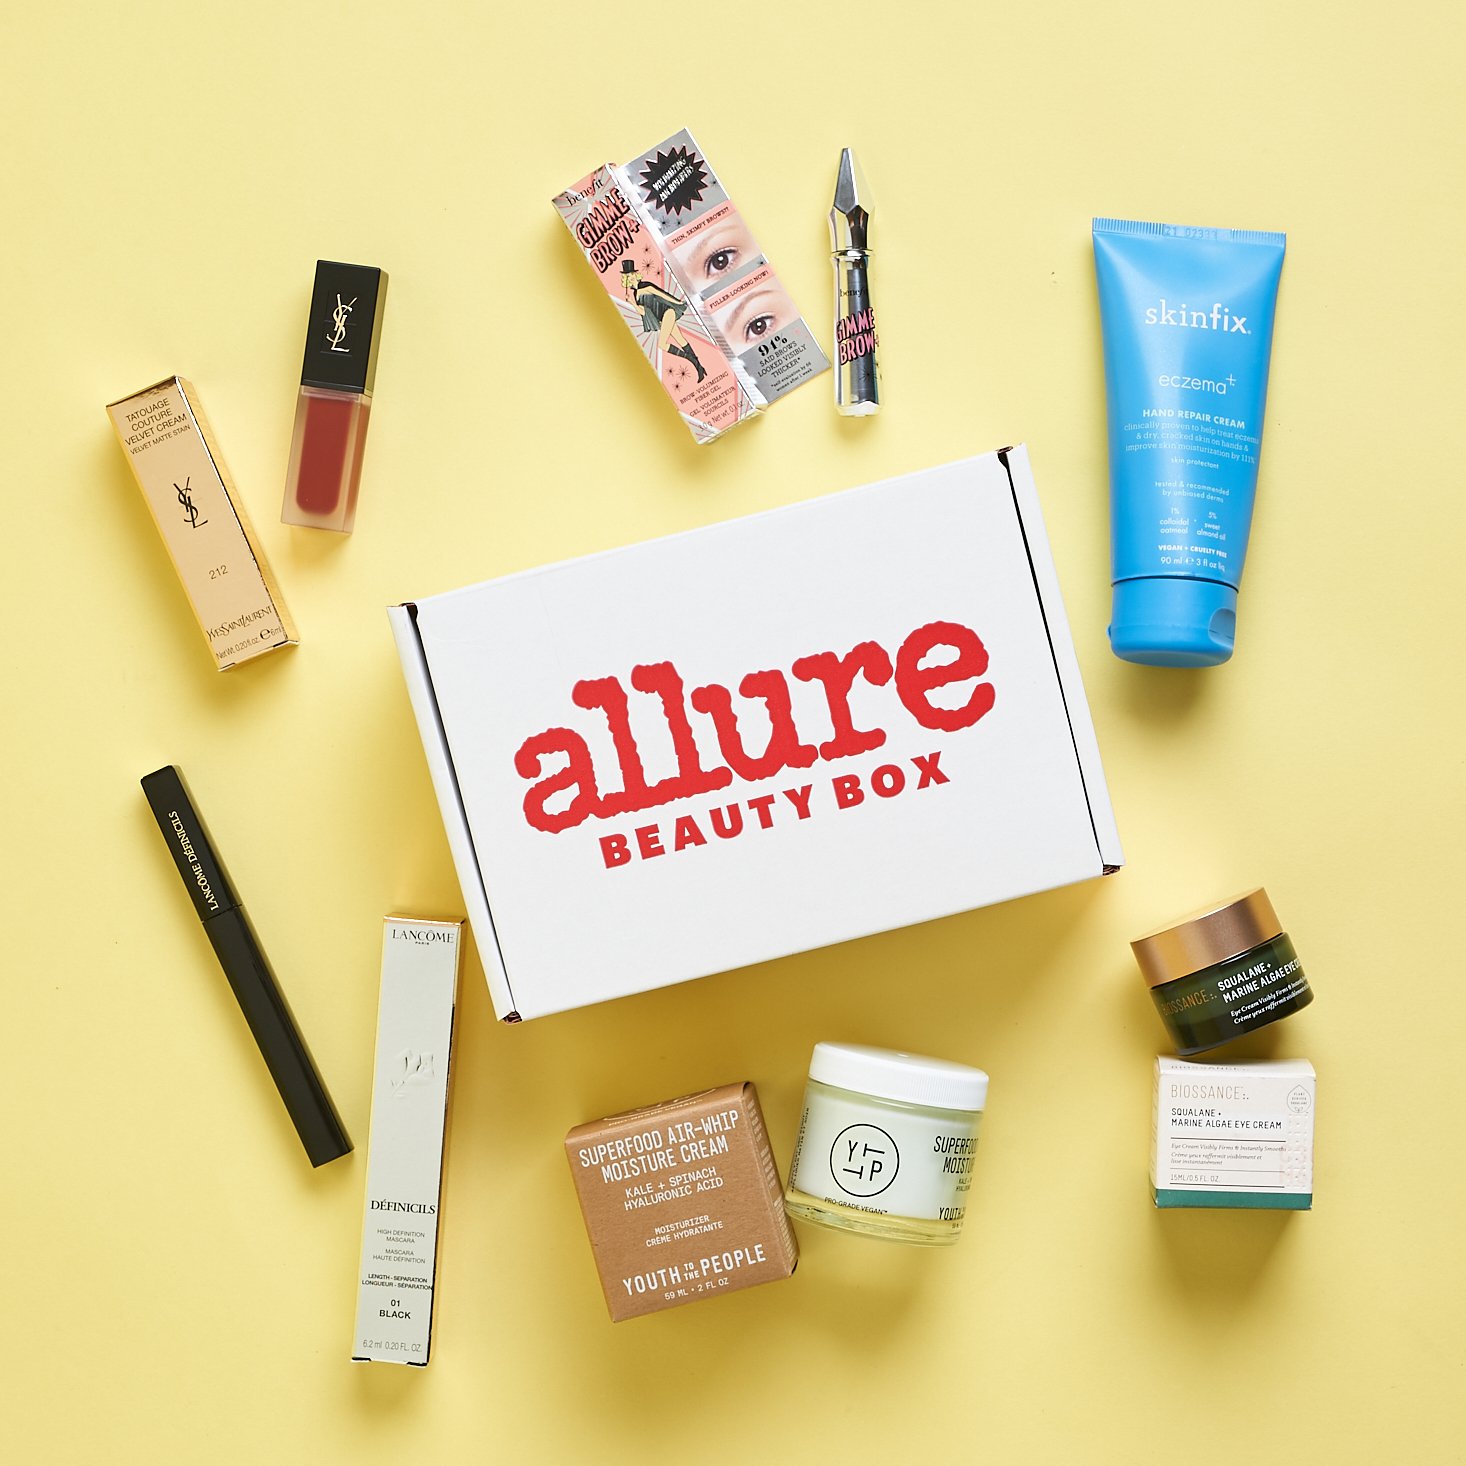 Allure Limited Edition Best of Beauty Box 2021 Review